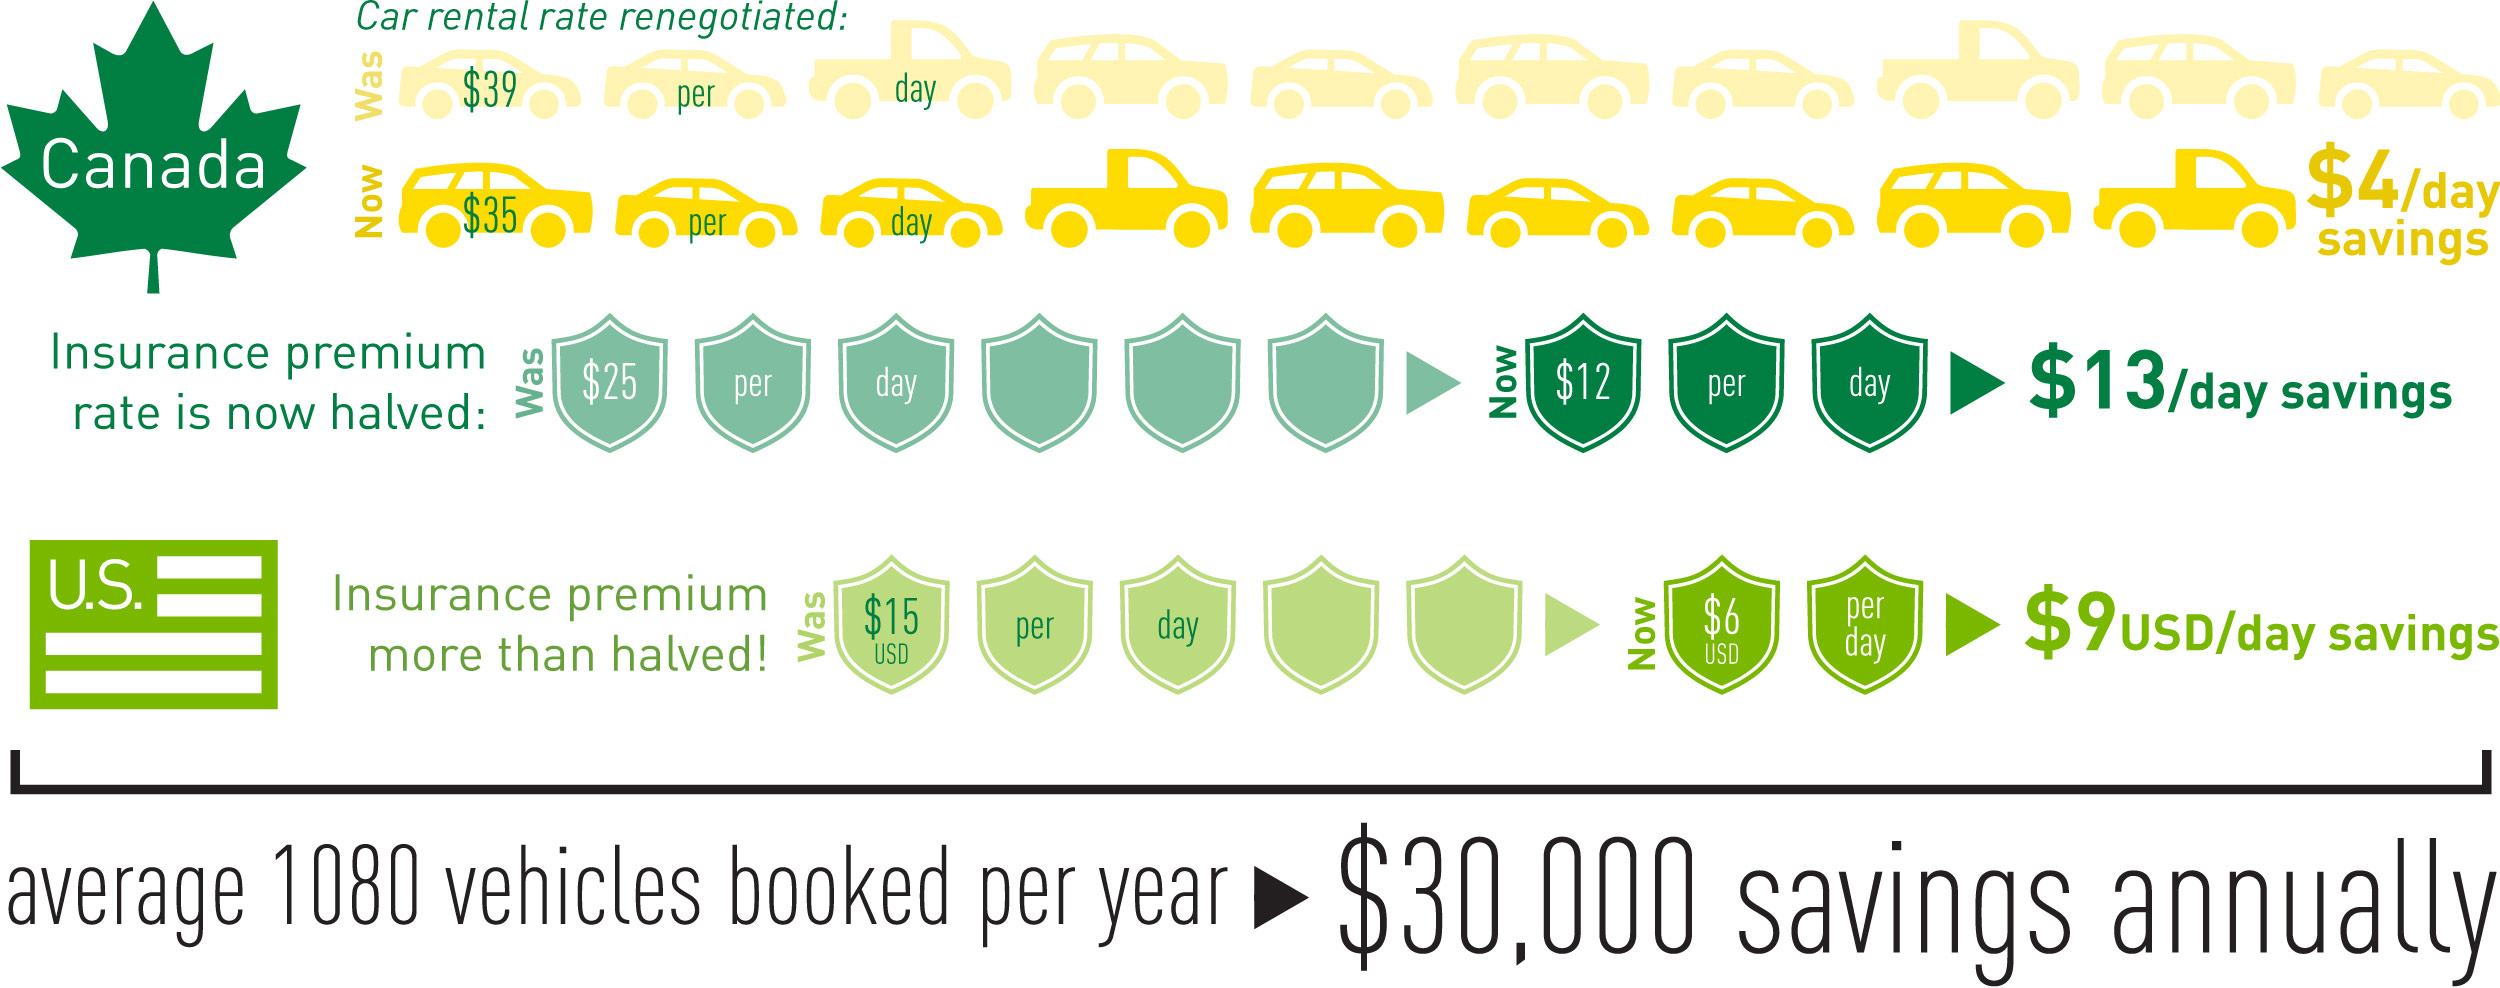 You can help the U of A save up to $30,000 on vehicle rentals per year